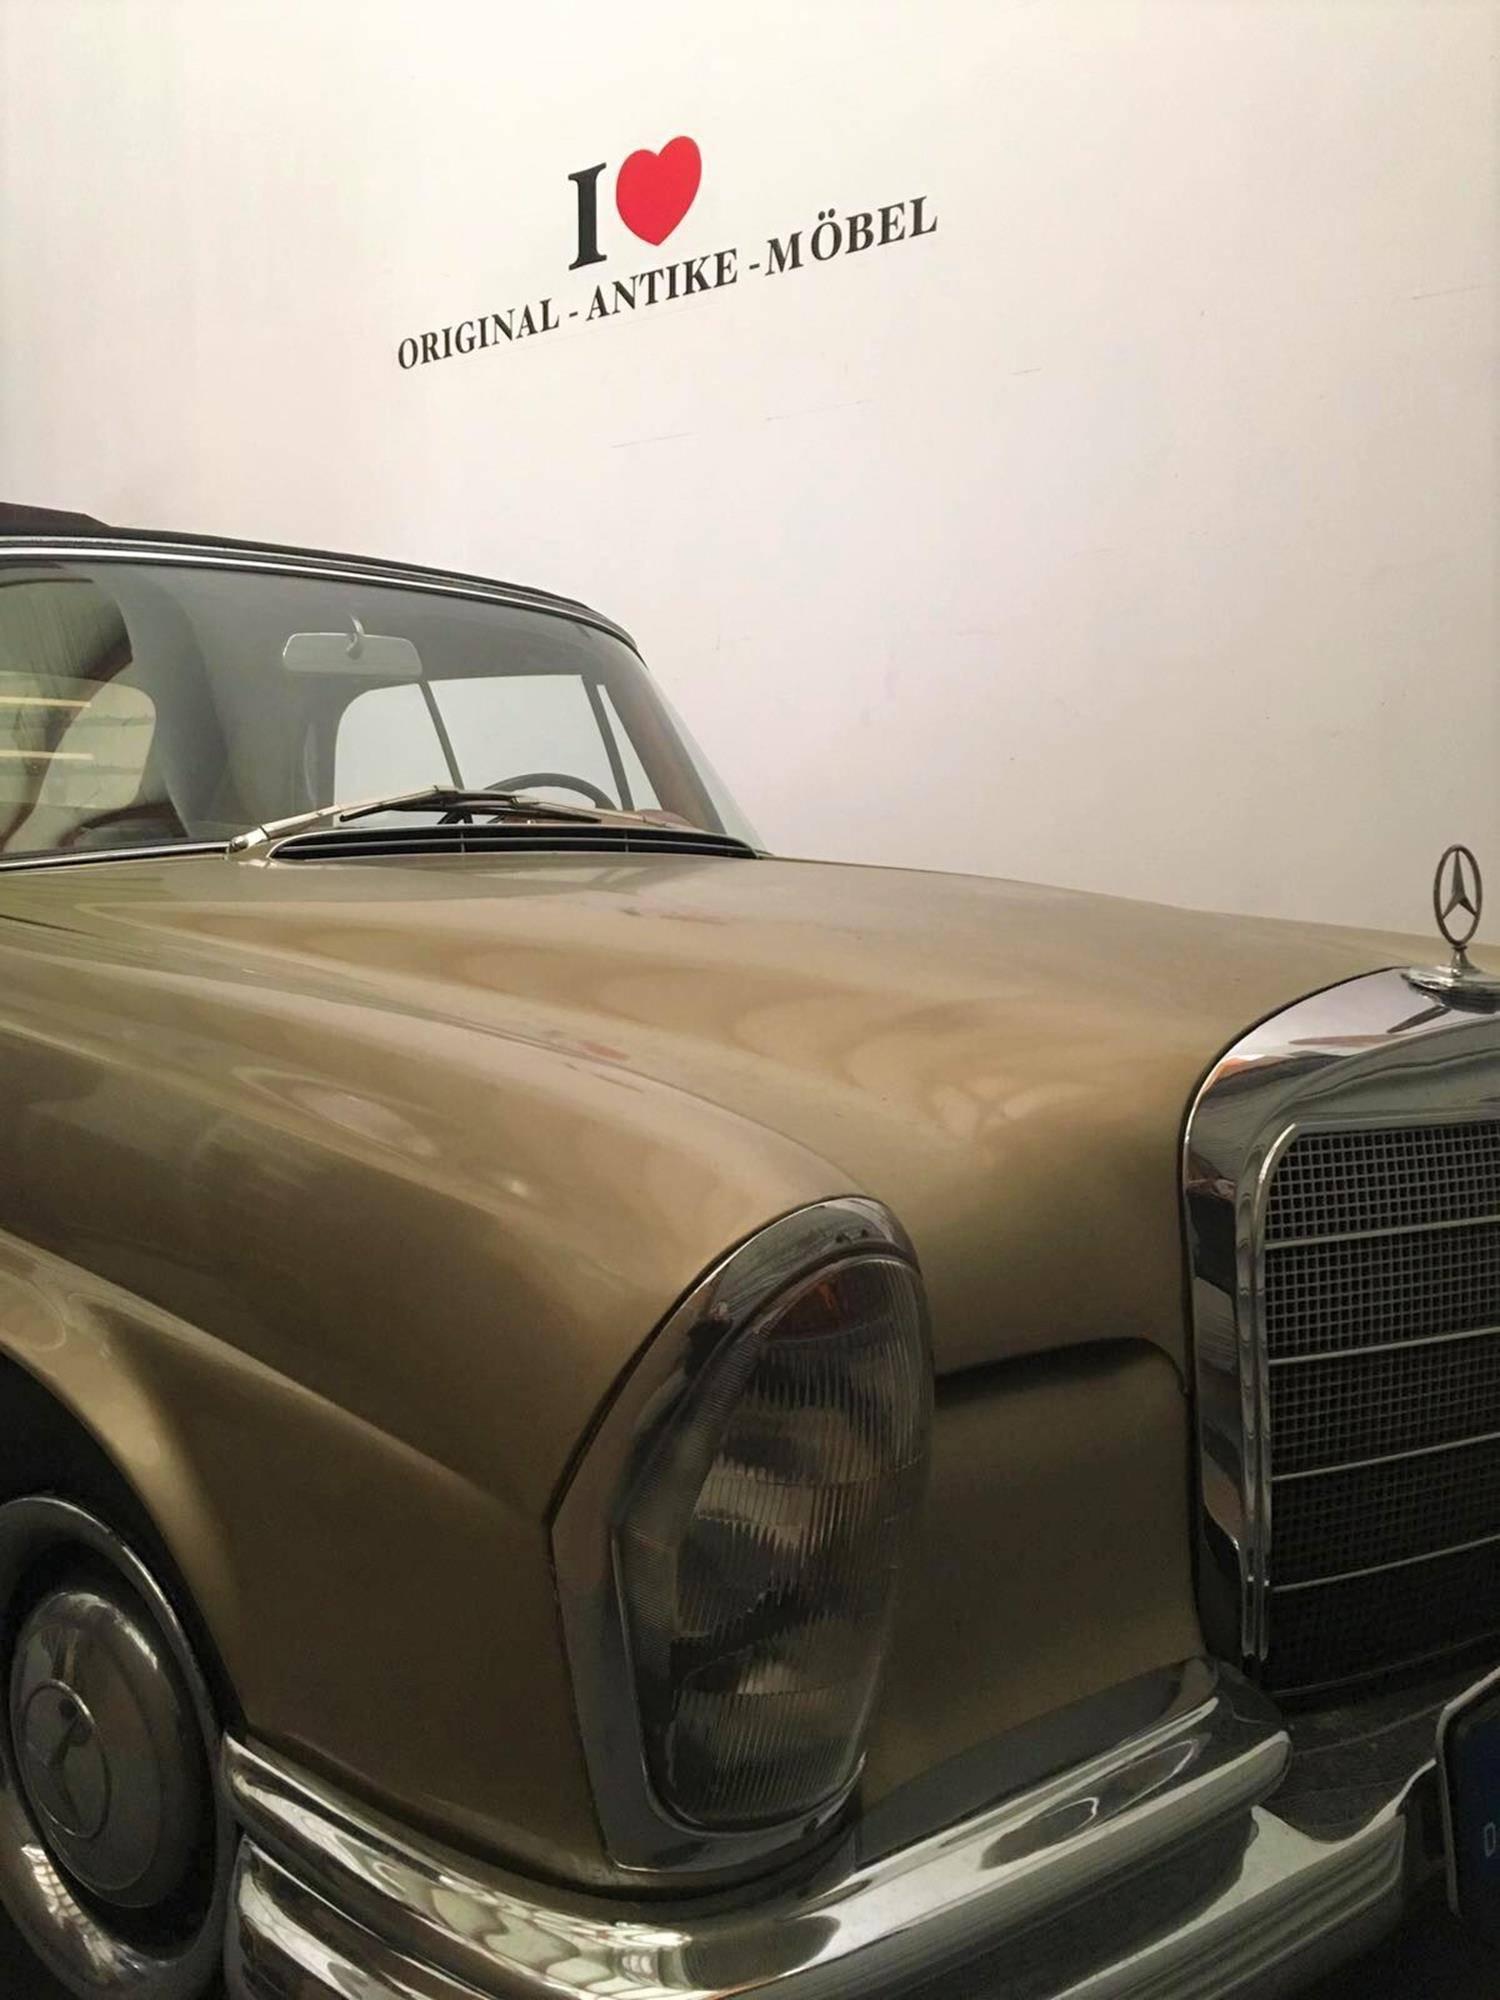 We got our hands on a very rare and unique Mercedes Benz W111 cabriolet from 1965. One of just 975 German made 250SE´s. No US-Import. Probably the only gold metallic cabriolet with original checkbook which is for sale. It features a 4 shift manual